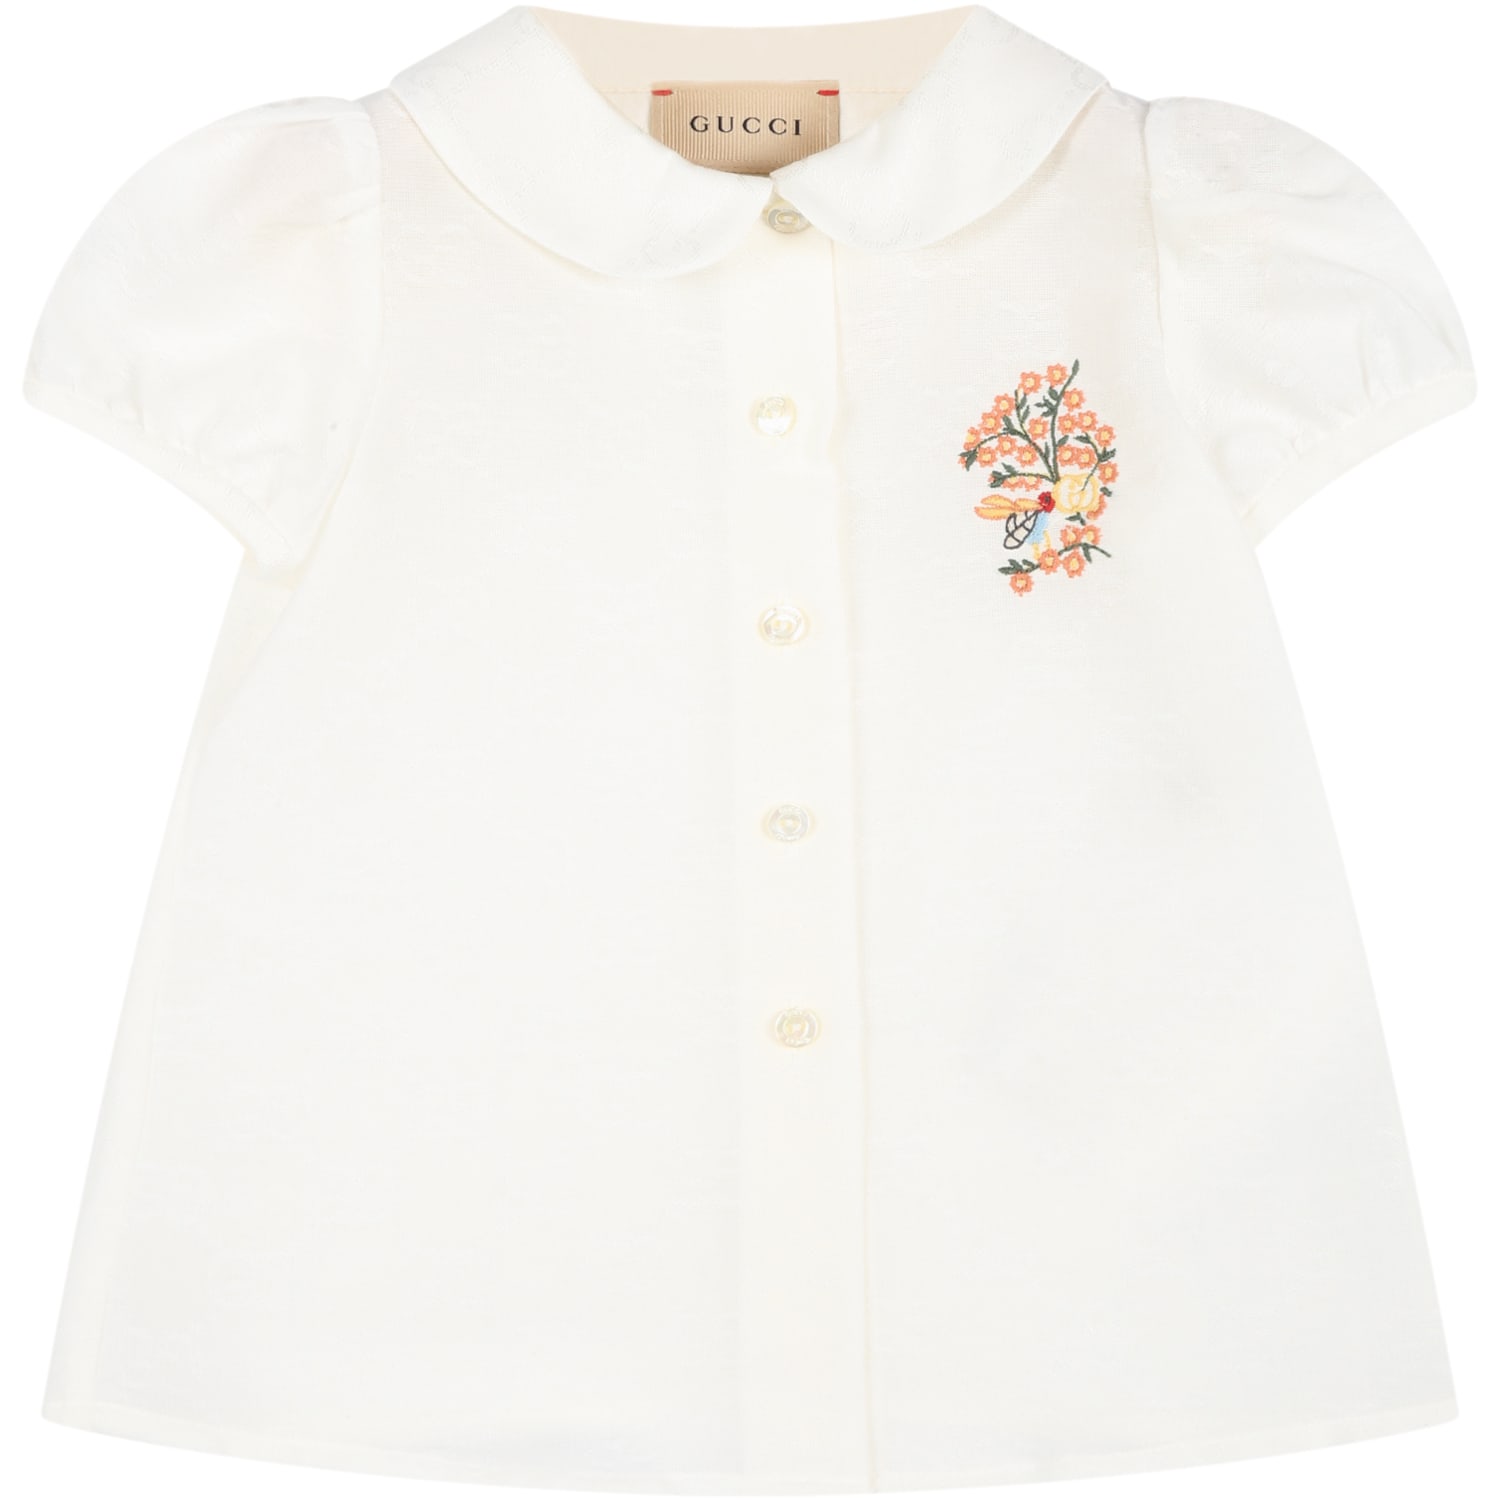 Gucci White Shirt For Baby Girl With Flowers And Logo